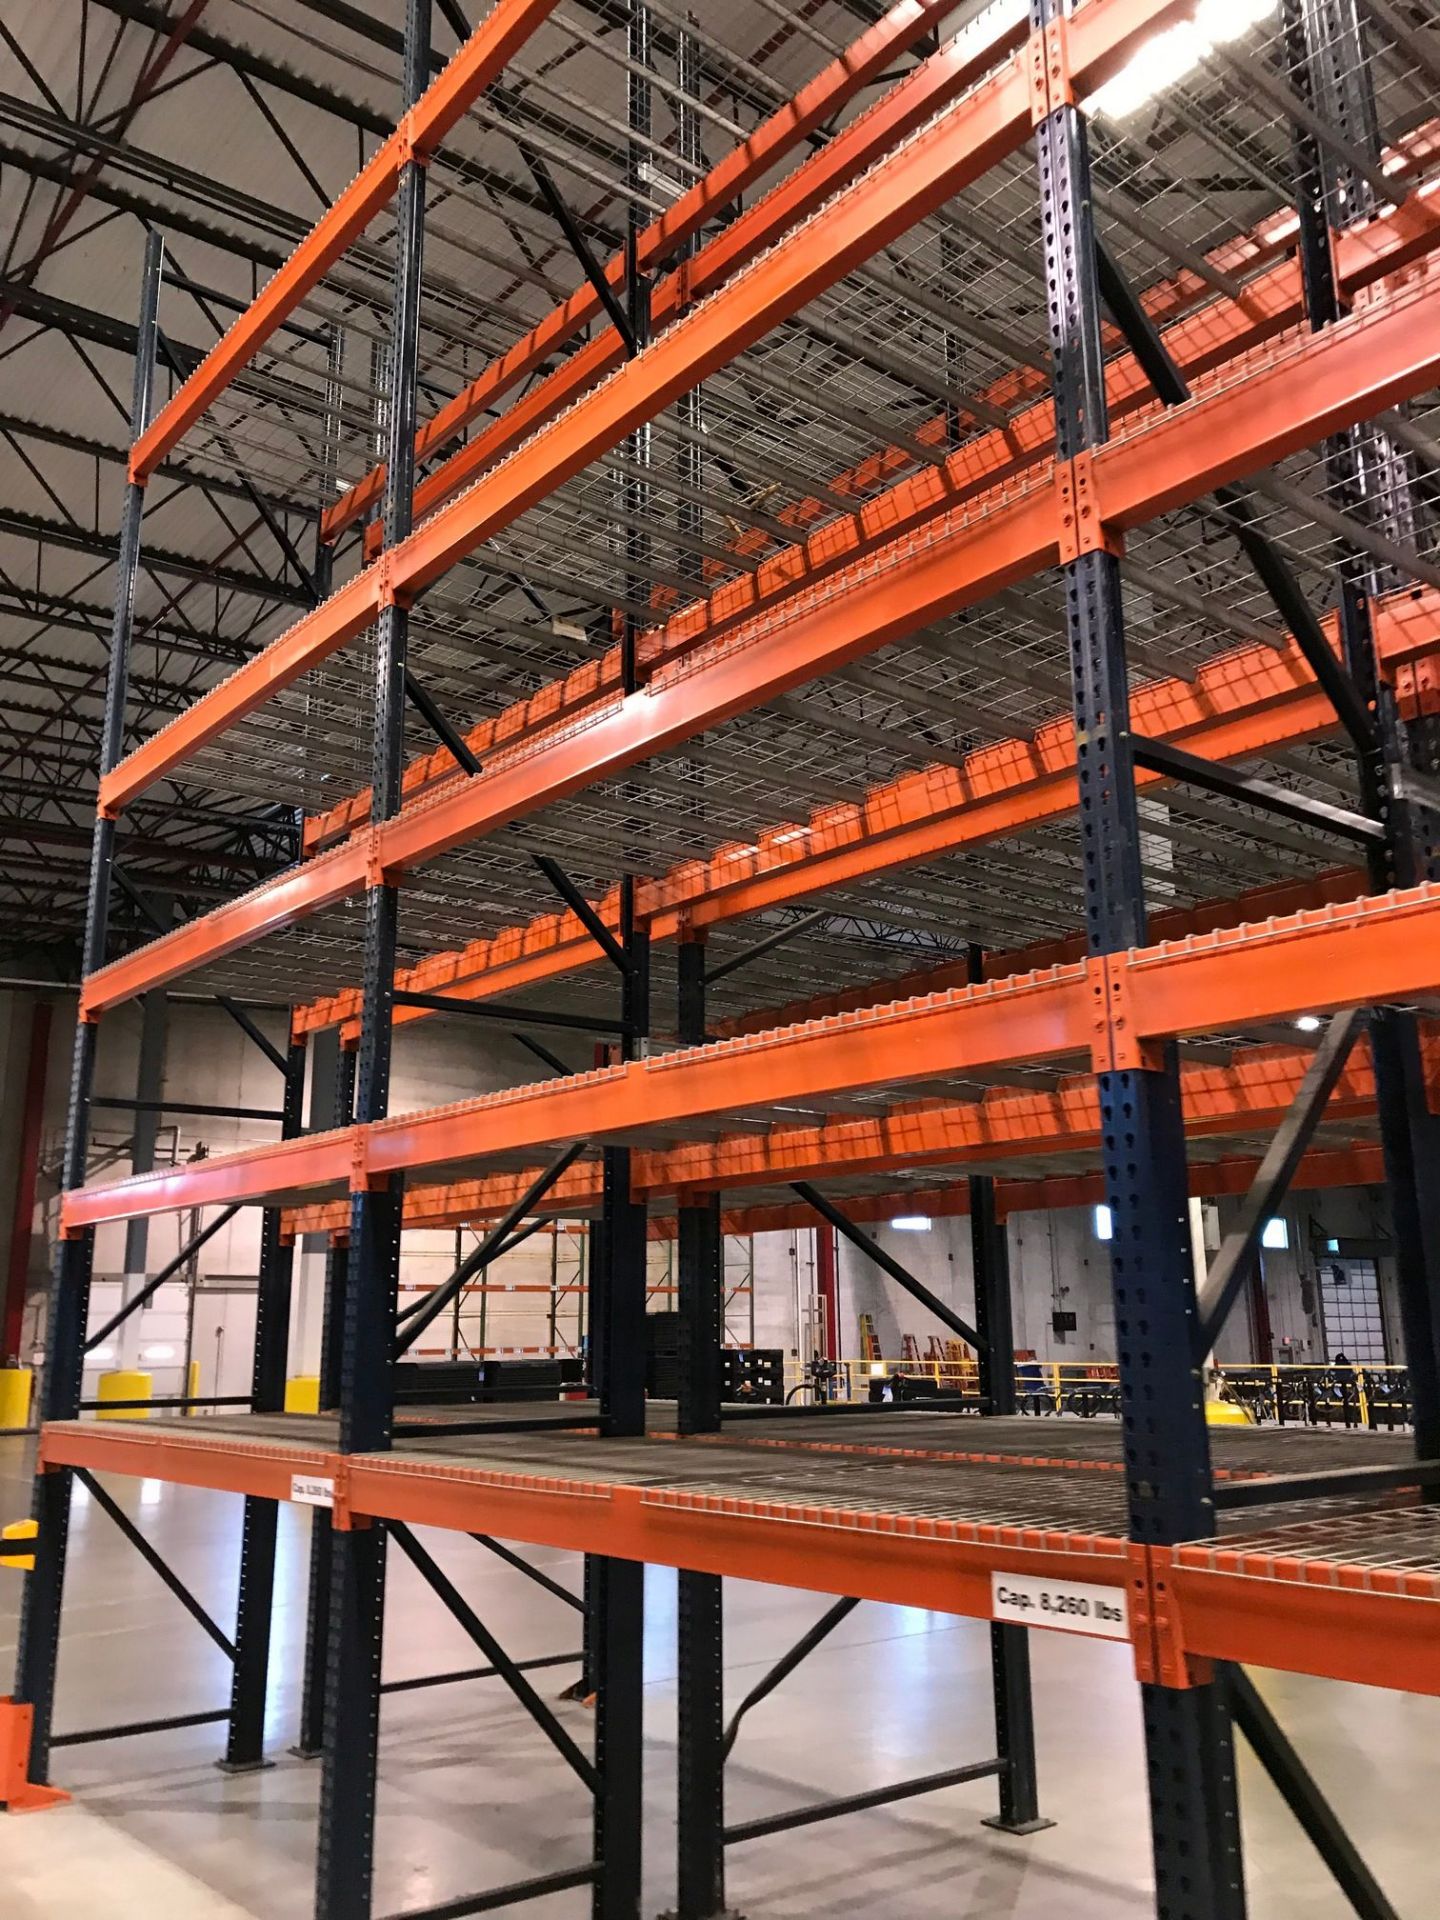 SECTIONS 60" X 108" X 288" TEARDROP TYPE ADJUSTABLE BEAM PALLET RACK WITH WIRE DECKING, 6" HIGH - Image 13 of 13